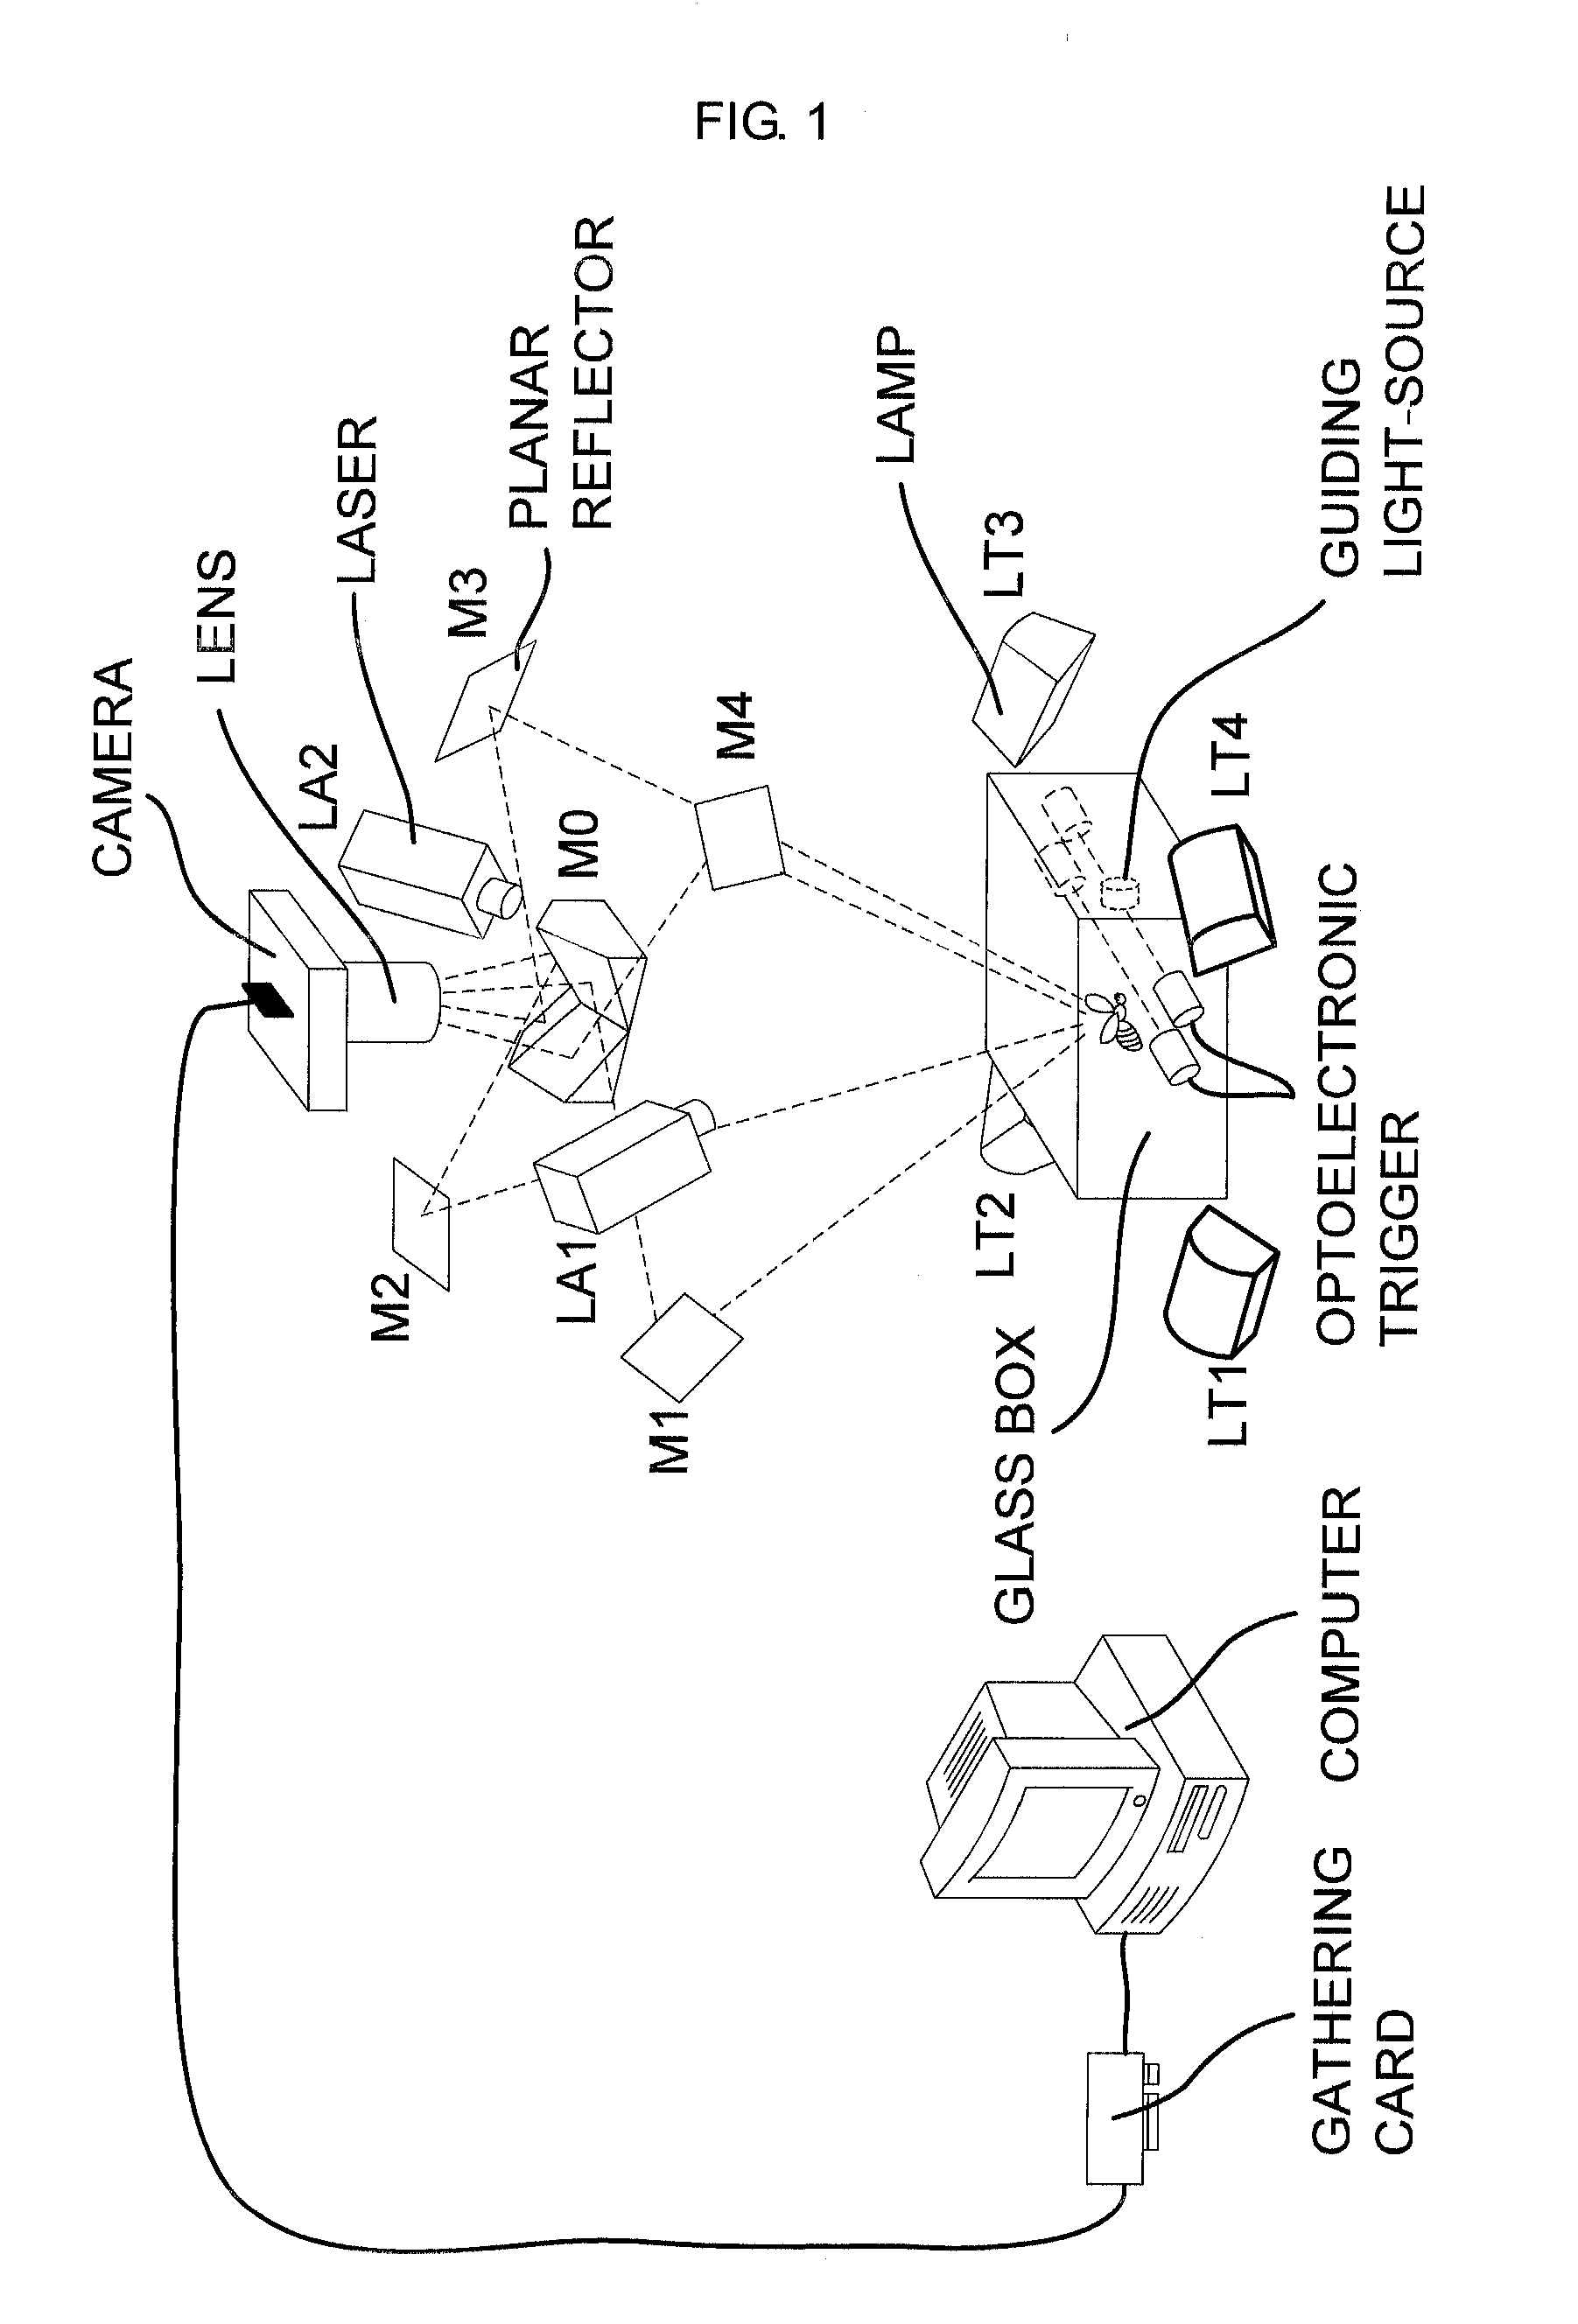 Methods and apparatus for measuring the flapping deformation of insect wings